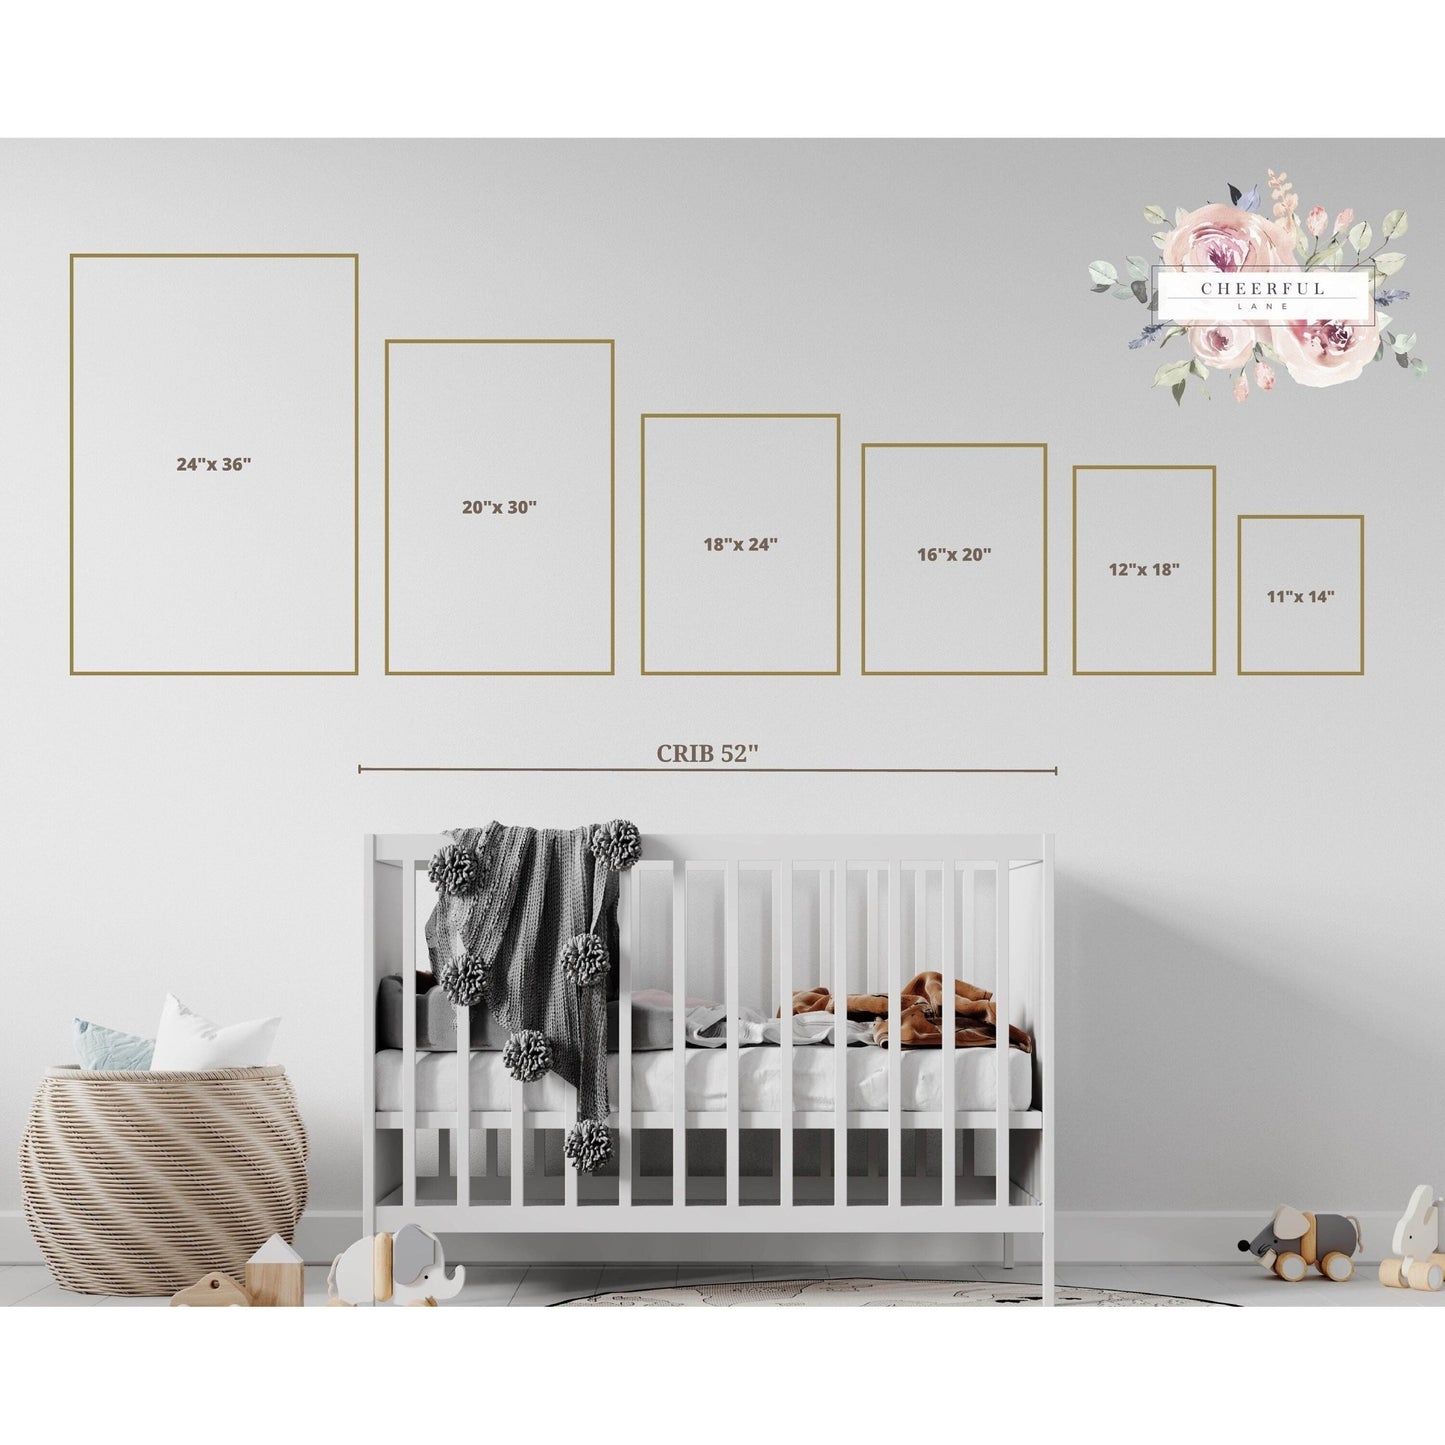 Load image into Gallery viewer, Personalized Kids Room Wall Art - Cheerful Lane
